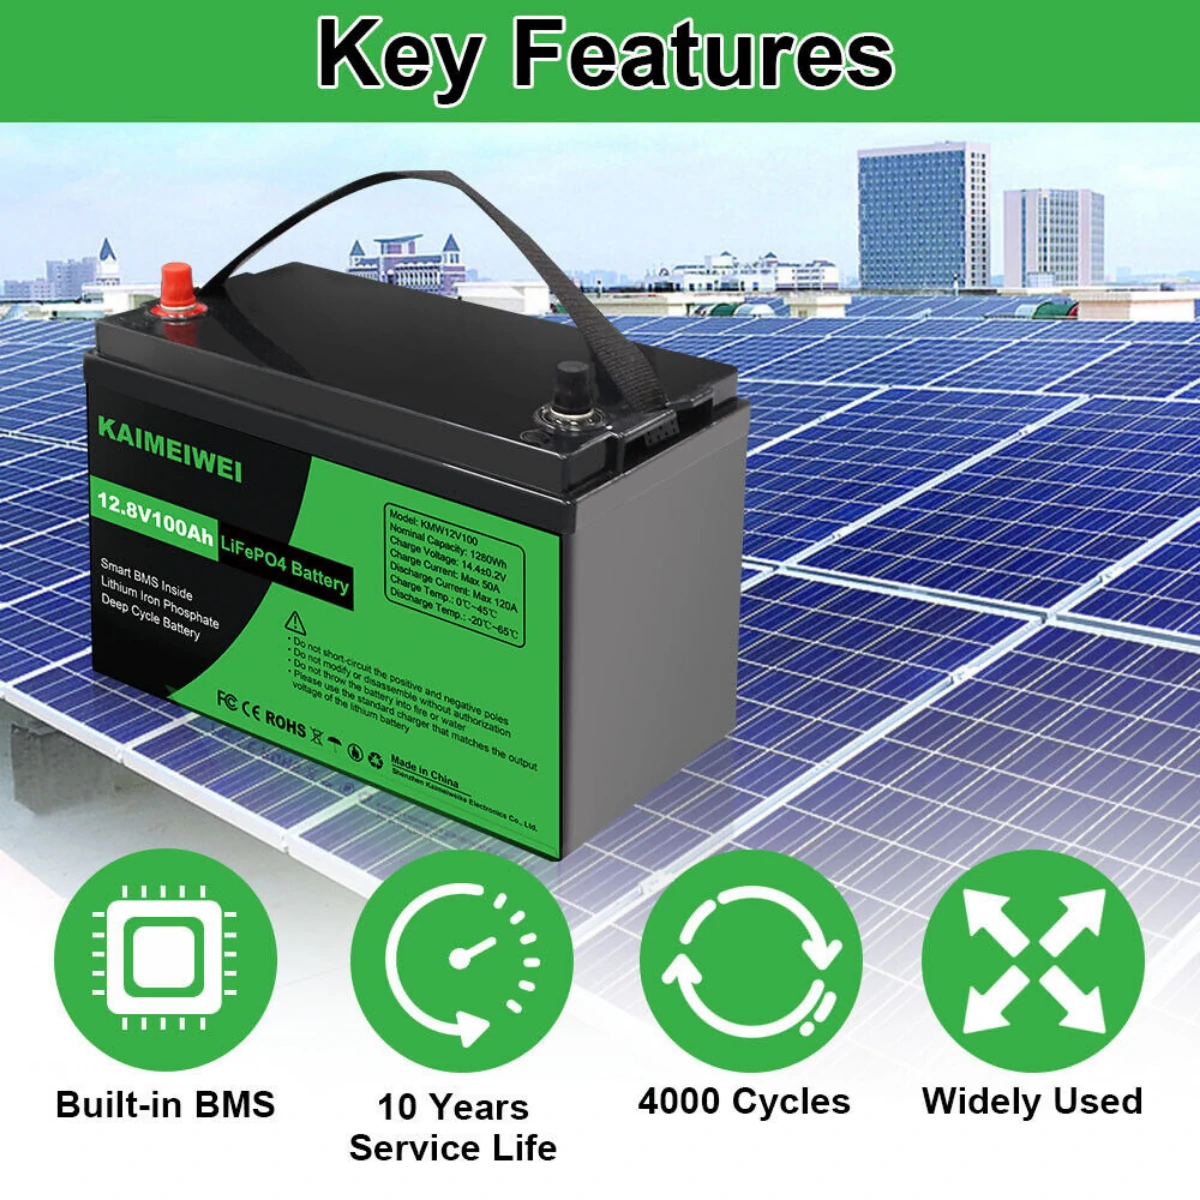 12V 100Ah LiFePO4 Battery 1280Wh lithium batteries 12v 100A BMS,over 7000+  Rechargeable Cycles, Support in 4S/8P, for RV,Camper, Solar, Home Energy